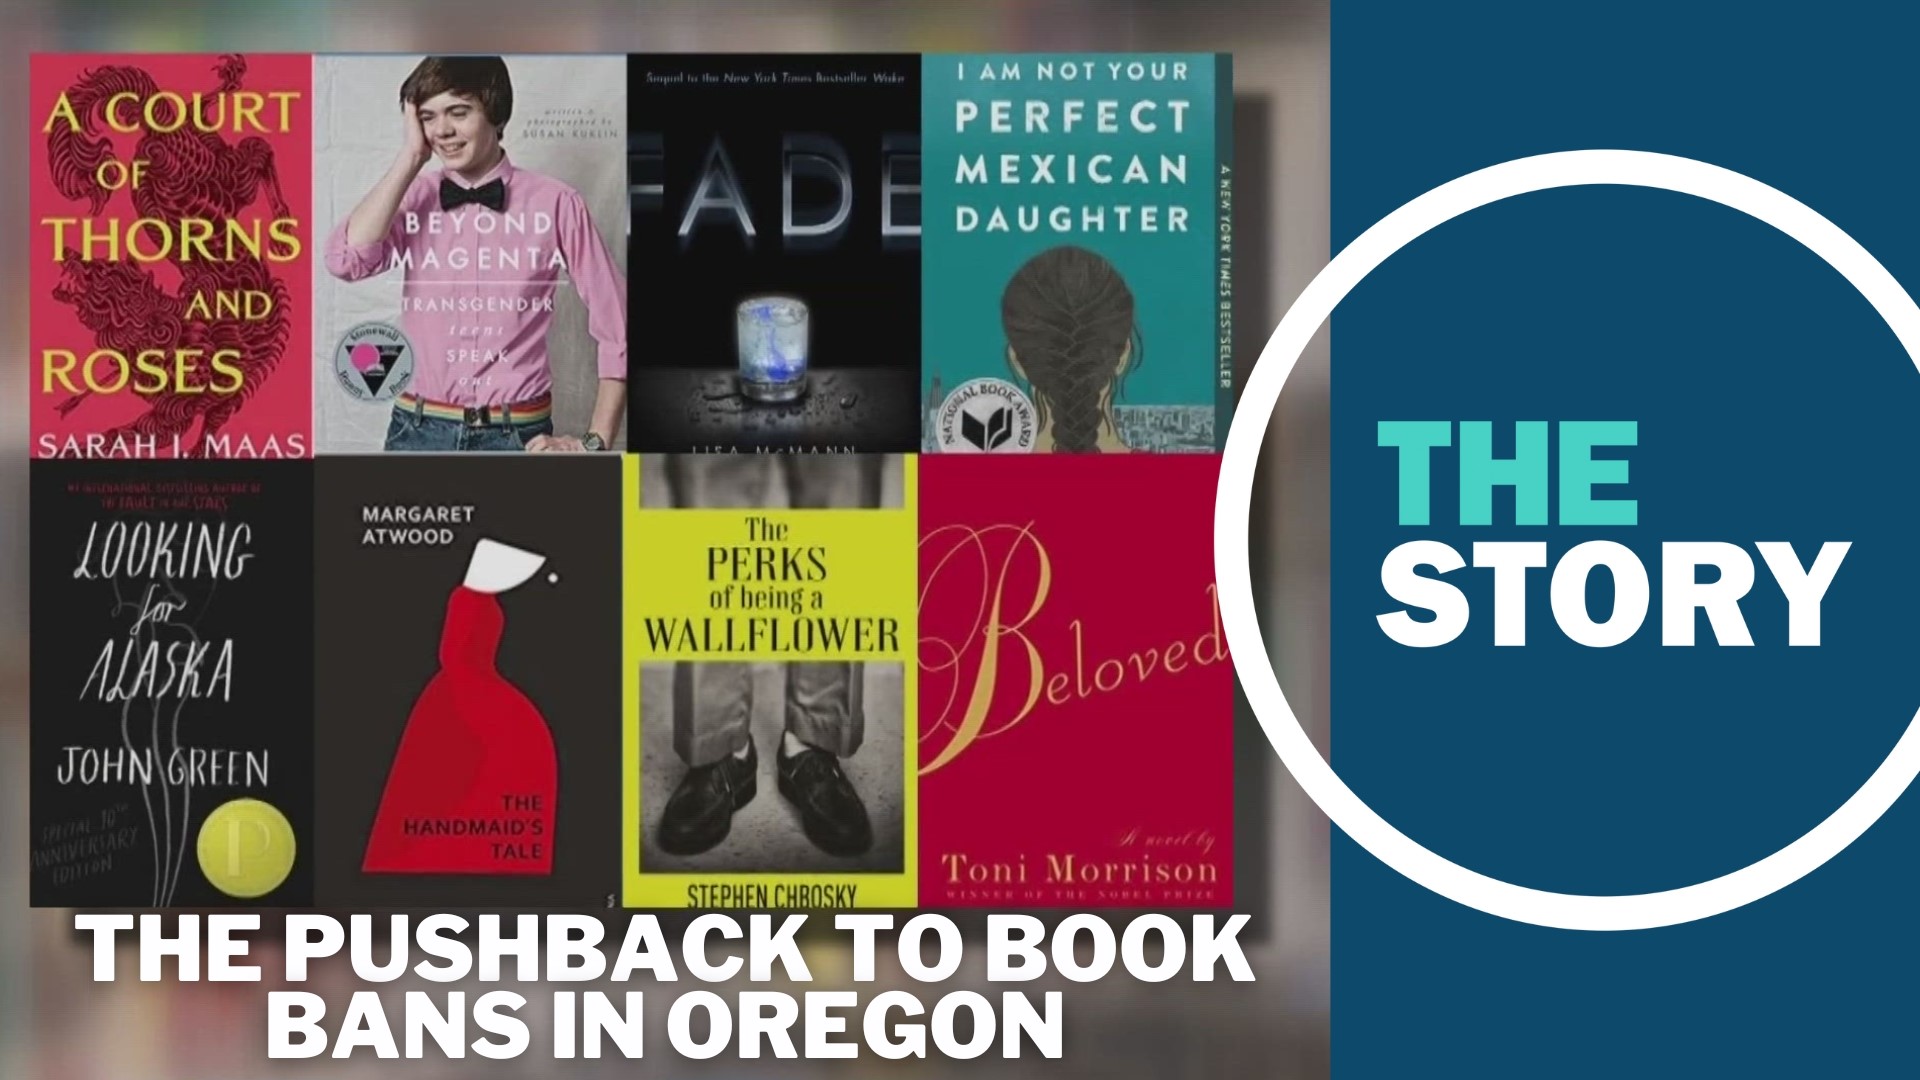 The Oregon Intellectual Freedom Committee has been tracking book challenges in Oregon for more than 30 years. Last year had the highest number of challenges.